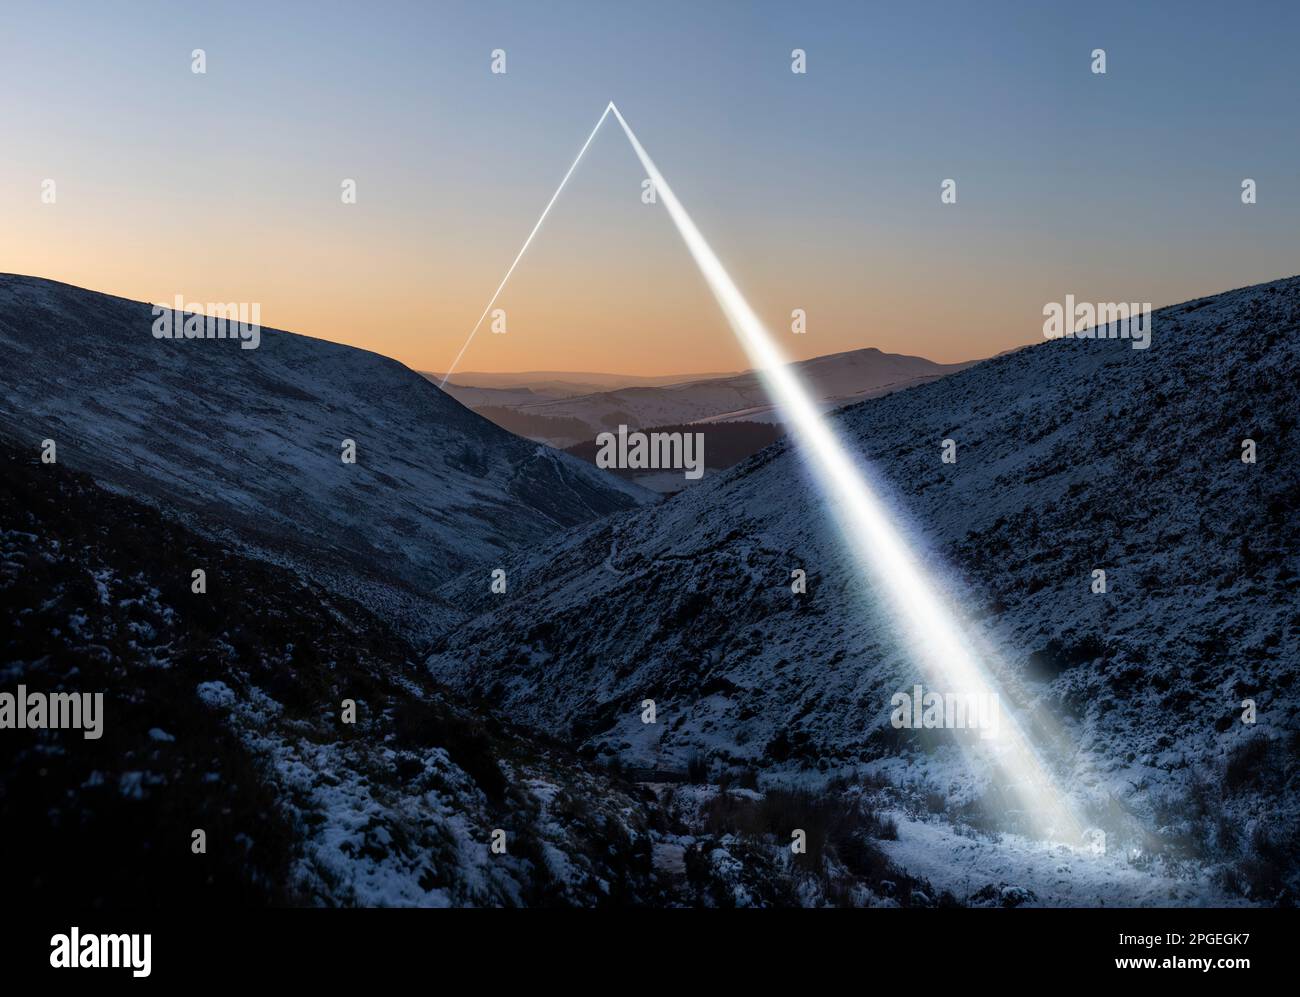 A beam of light through a winter landscape at dusk, a strange light source projects onto the natural landscape like energy Stock Photo